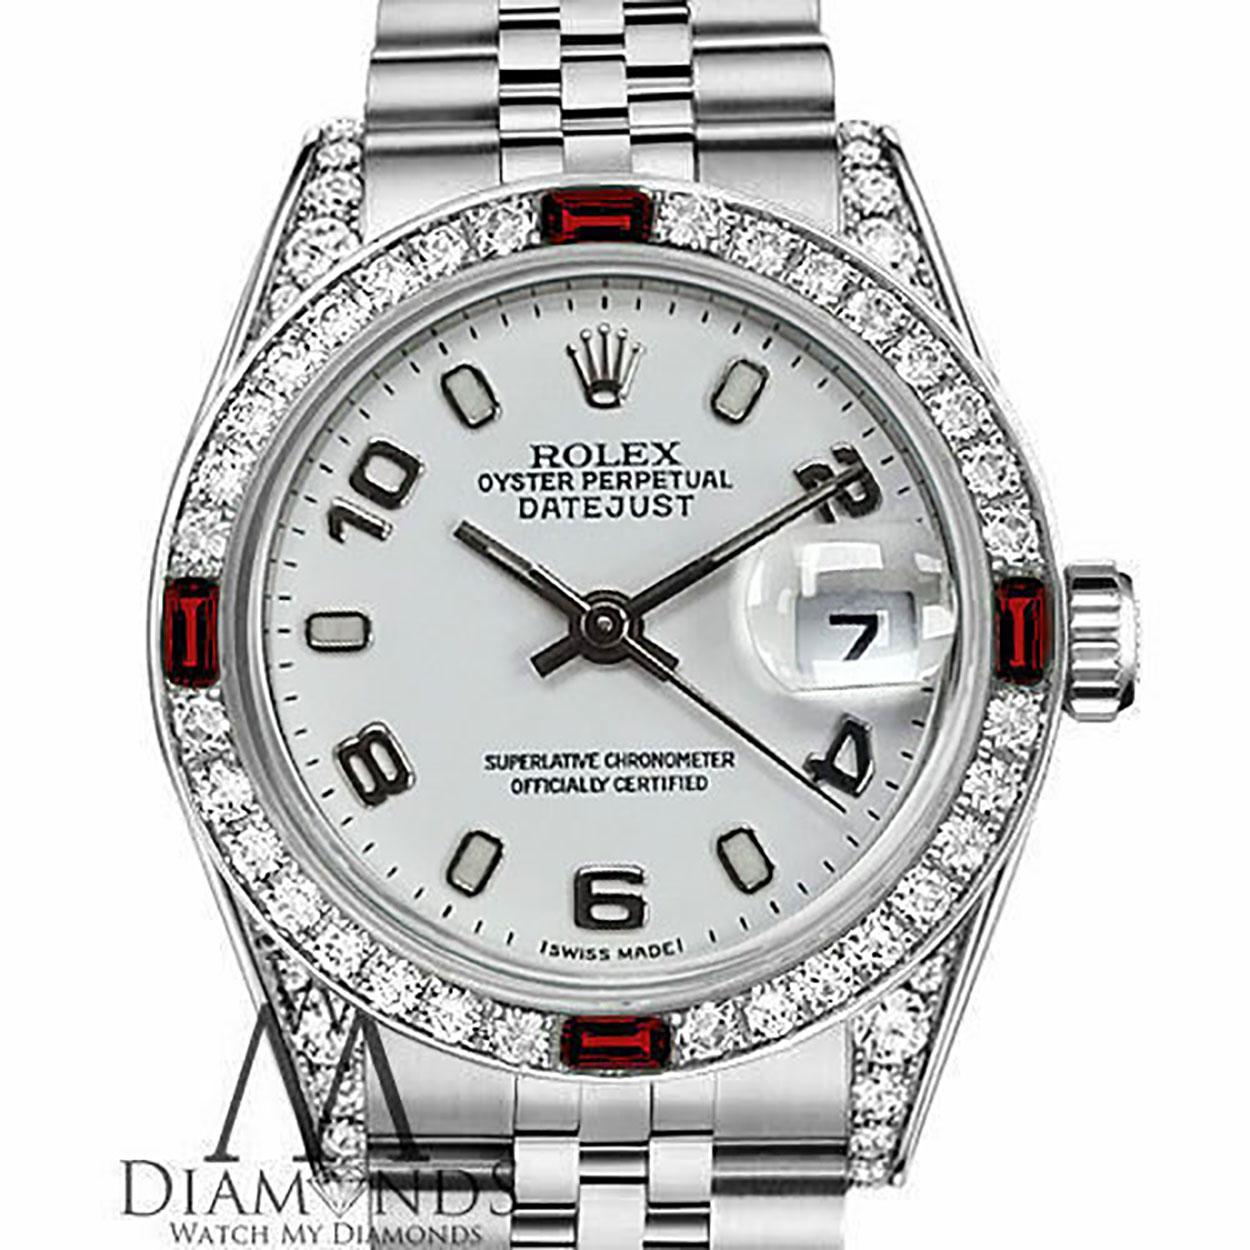 Rolex 26mm Datejust White Dial Diamond & Ruby Bezel Stainless Steel Watch
We take great pride in presenting this timepiece, which is in impeccable condition, having undergone professional polishing and servicing to maintain its pristine appearance.